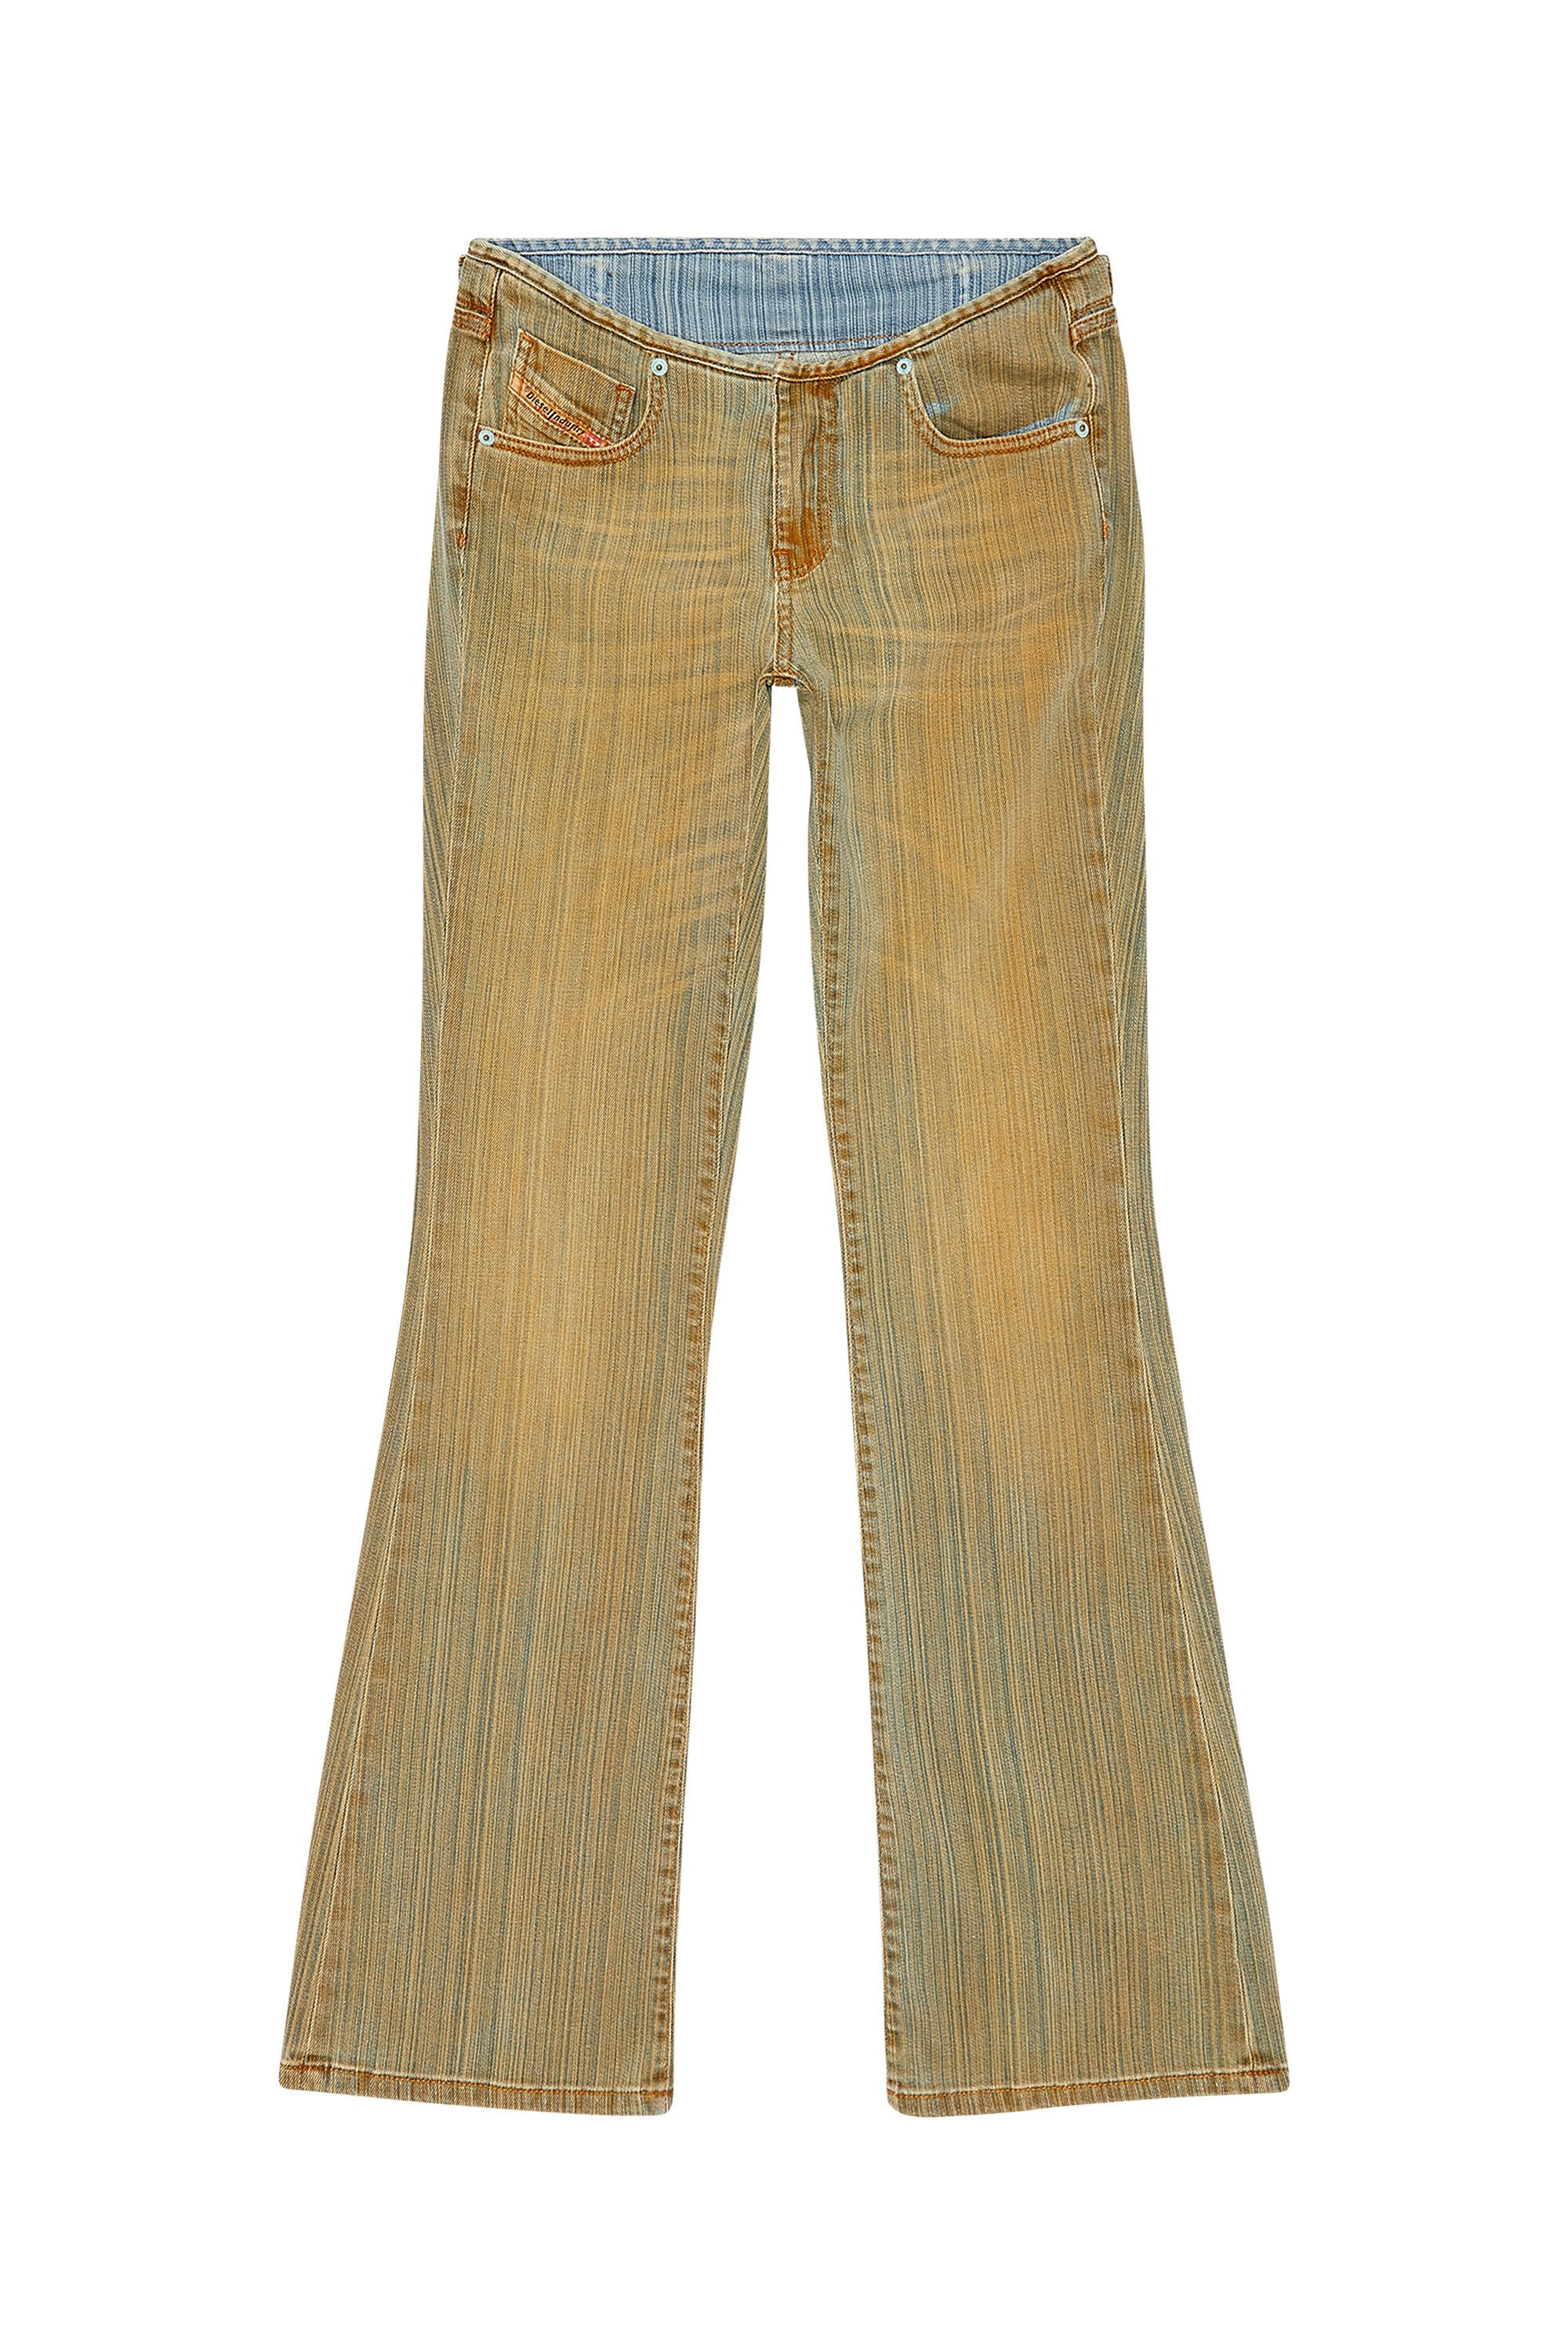 BOOTCUT AND FLARE JEANS 1969 D-EBBEY 0NLAU - 1